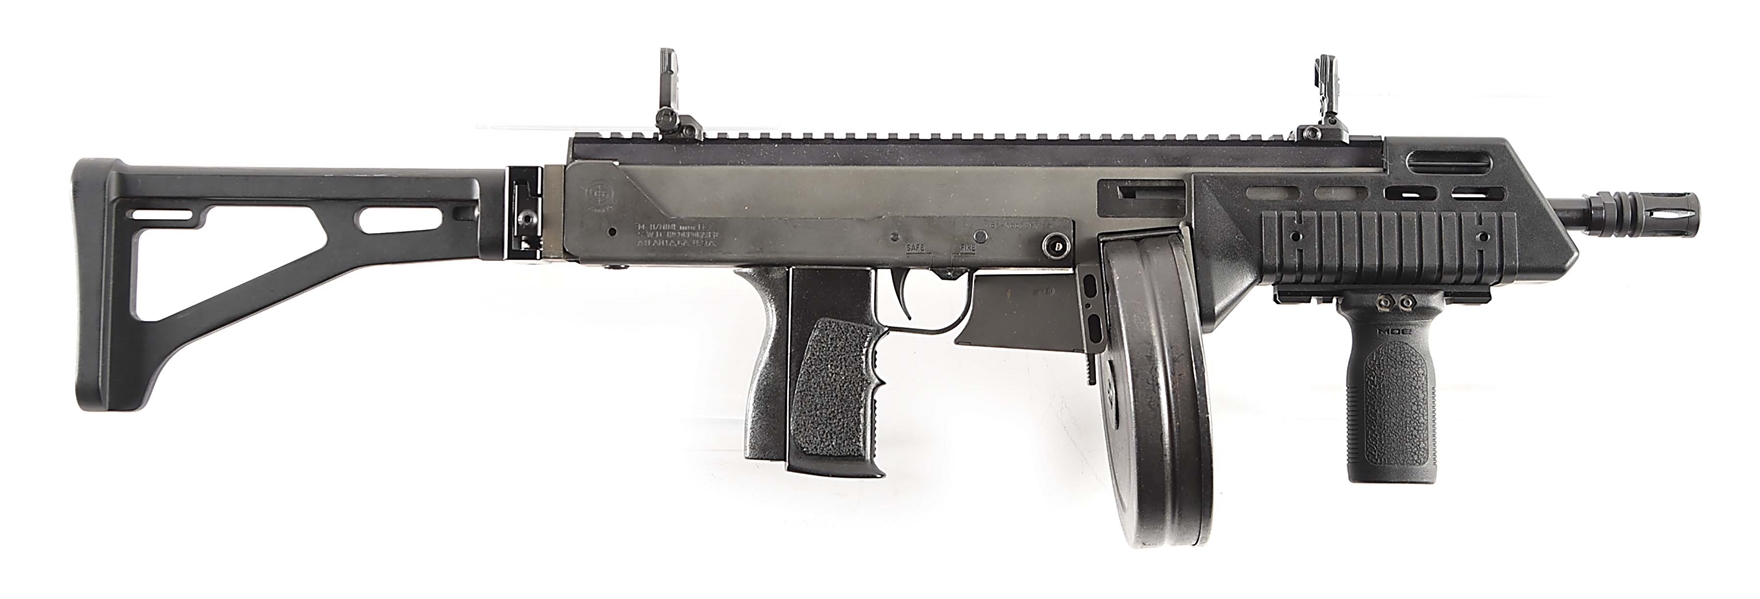 (N) SWD COBRAY M-11 MACHINE GUN WITH LAGE 9MM ACCESSORY PACKAGE INSTALLED (FULLY TRANSFERABLE).